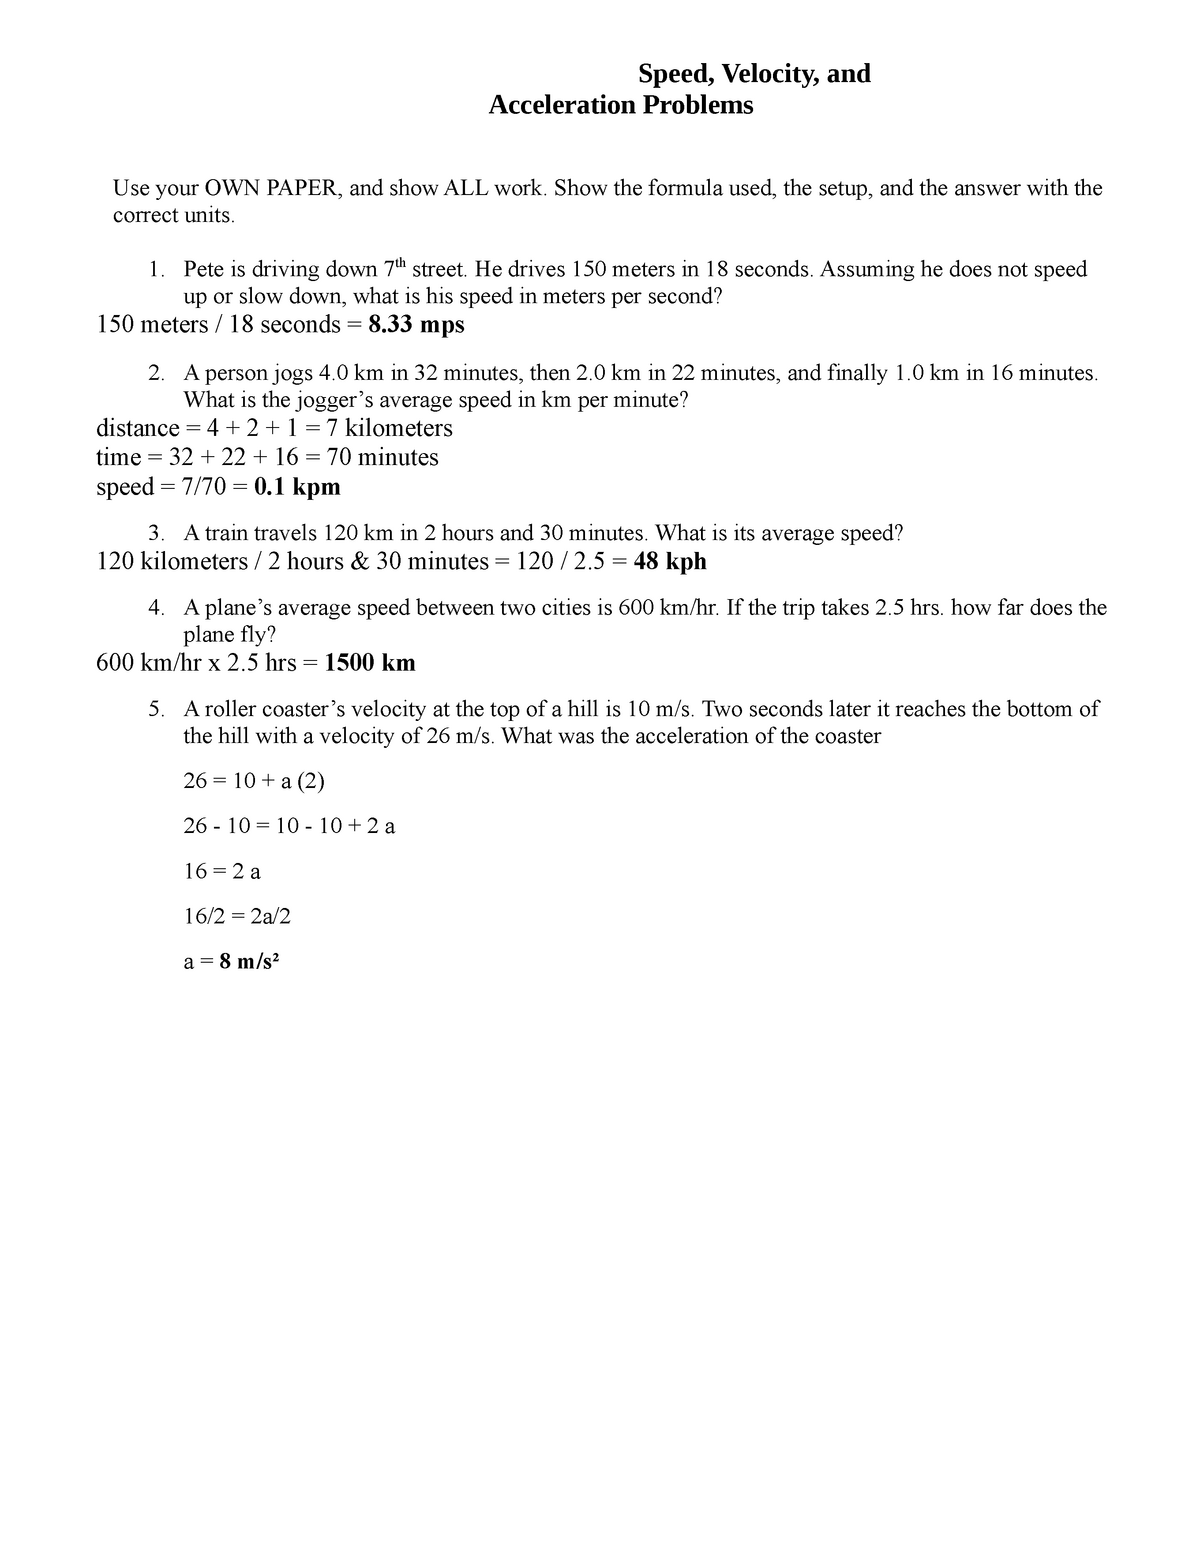 Speed,velocity, and acceleration problems - Speed, Velocity, and In Velocity And Acceleration Calculation Worksheet